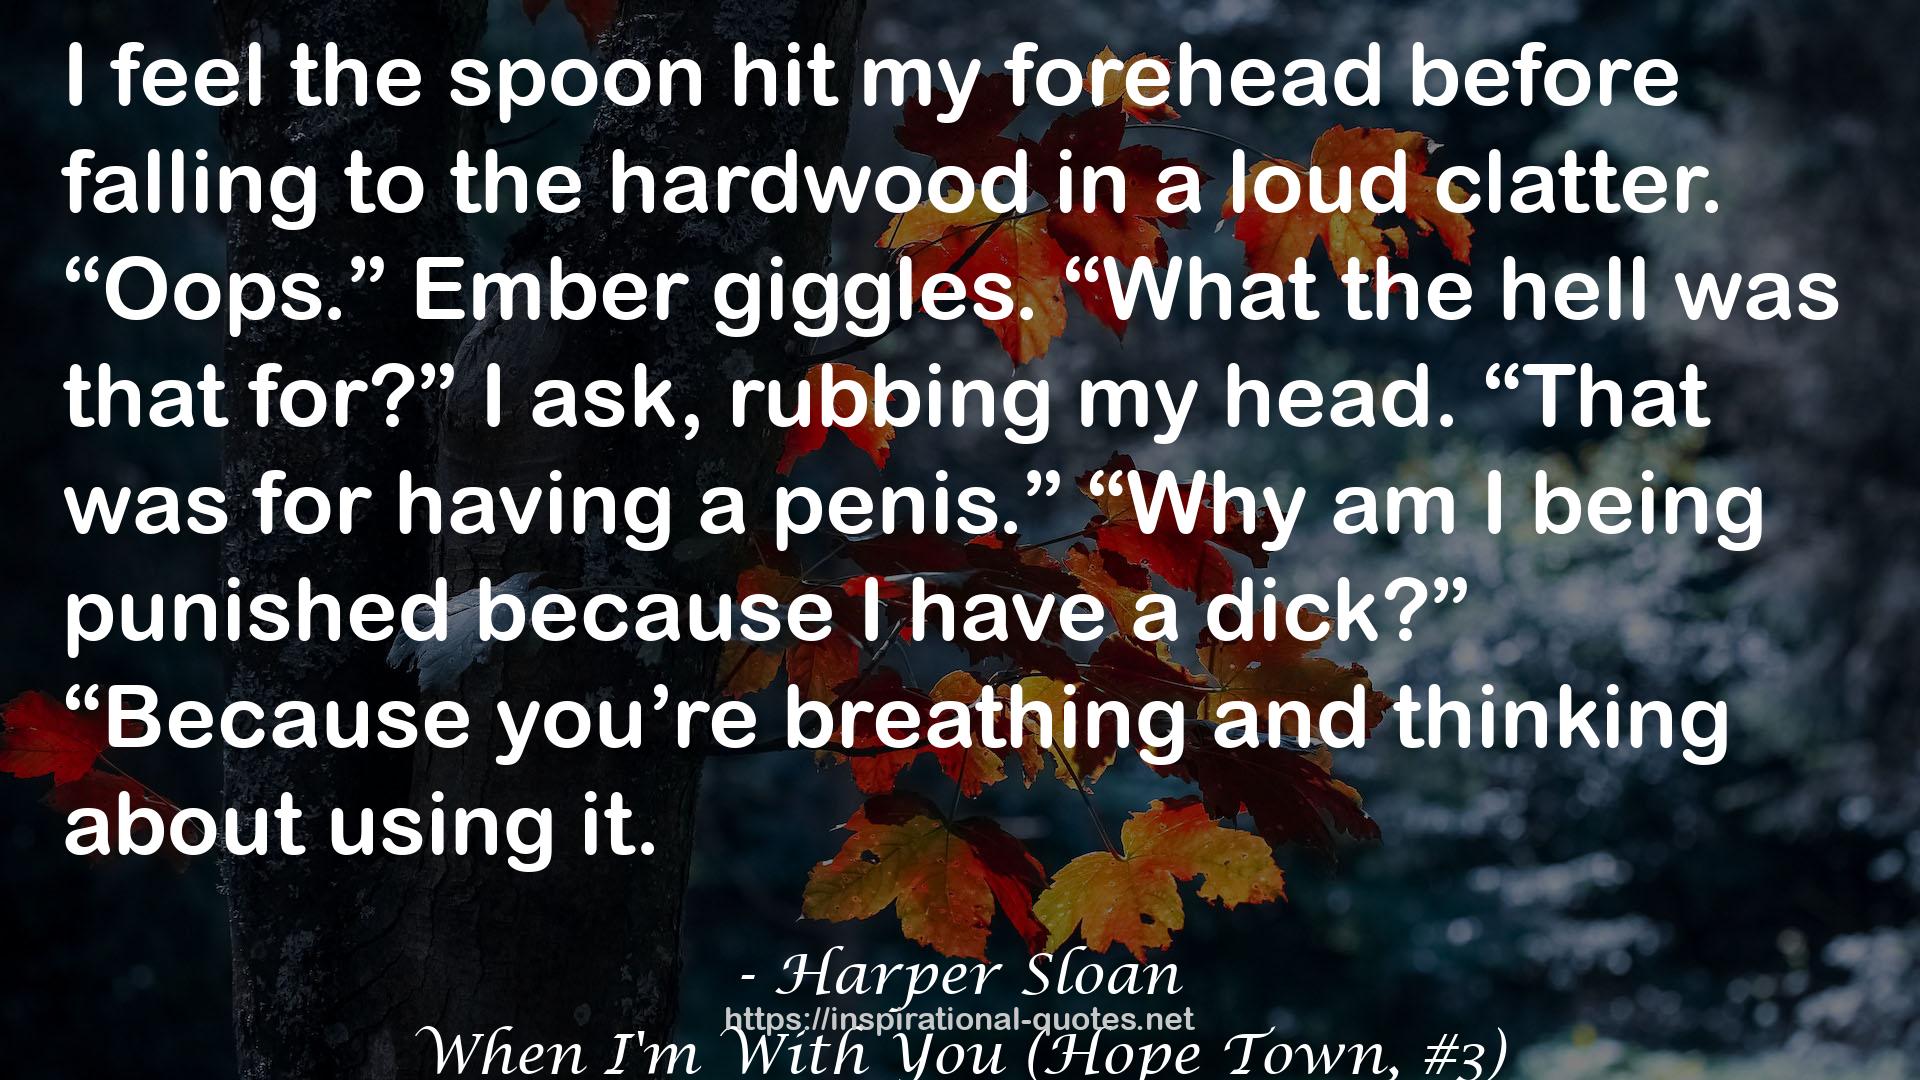 When I'm With You (Hope Town, #3) QUOTES